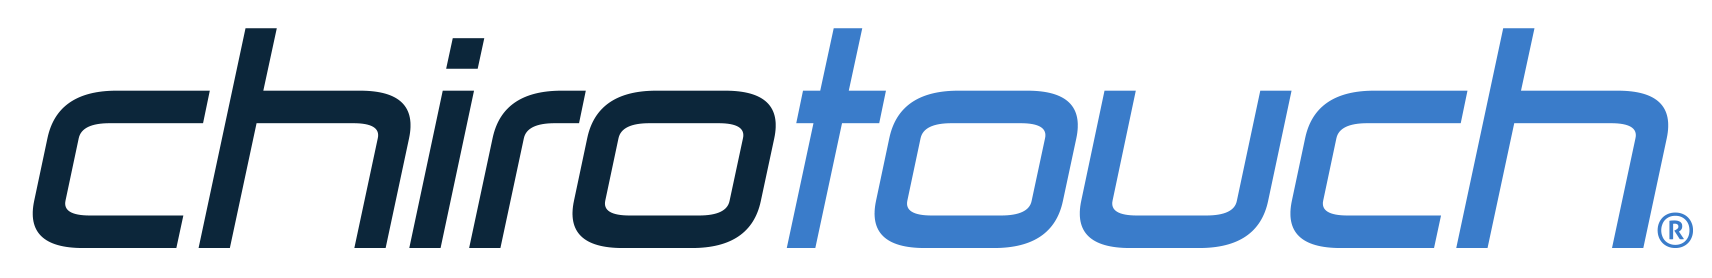 ChiroTouch demo form logo